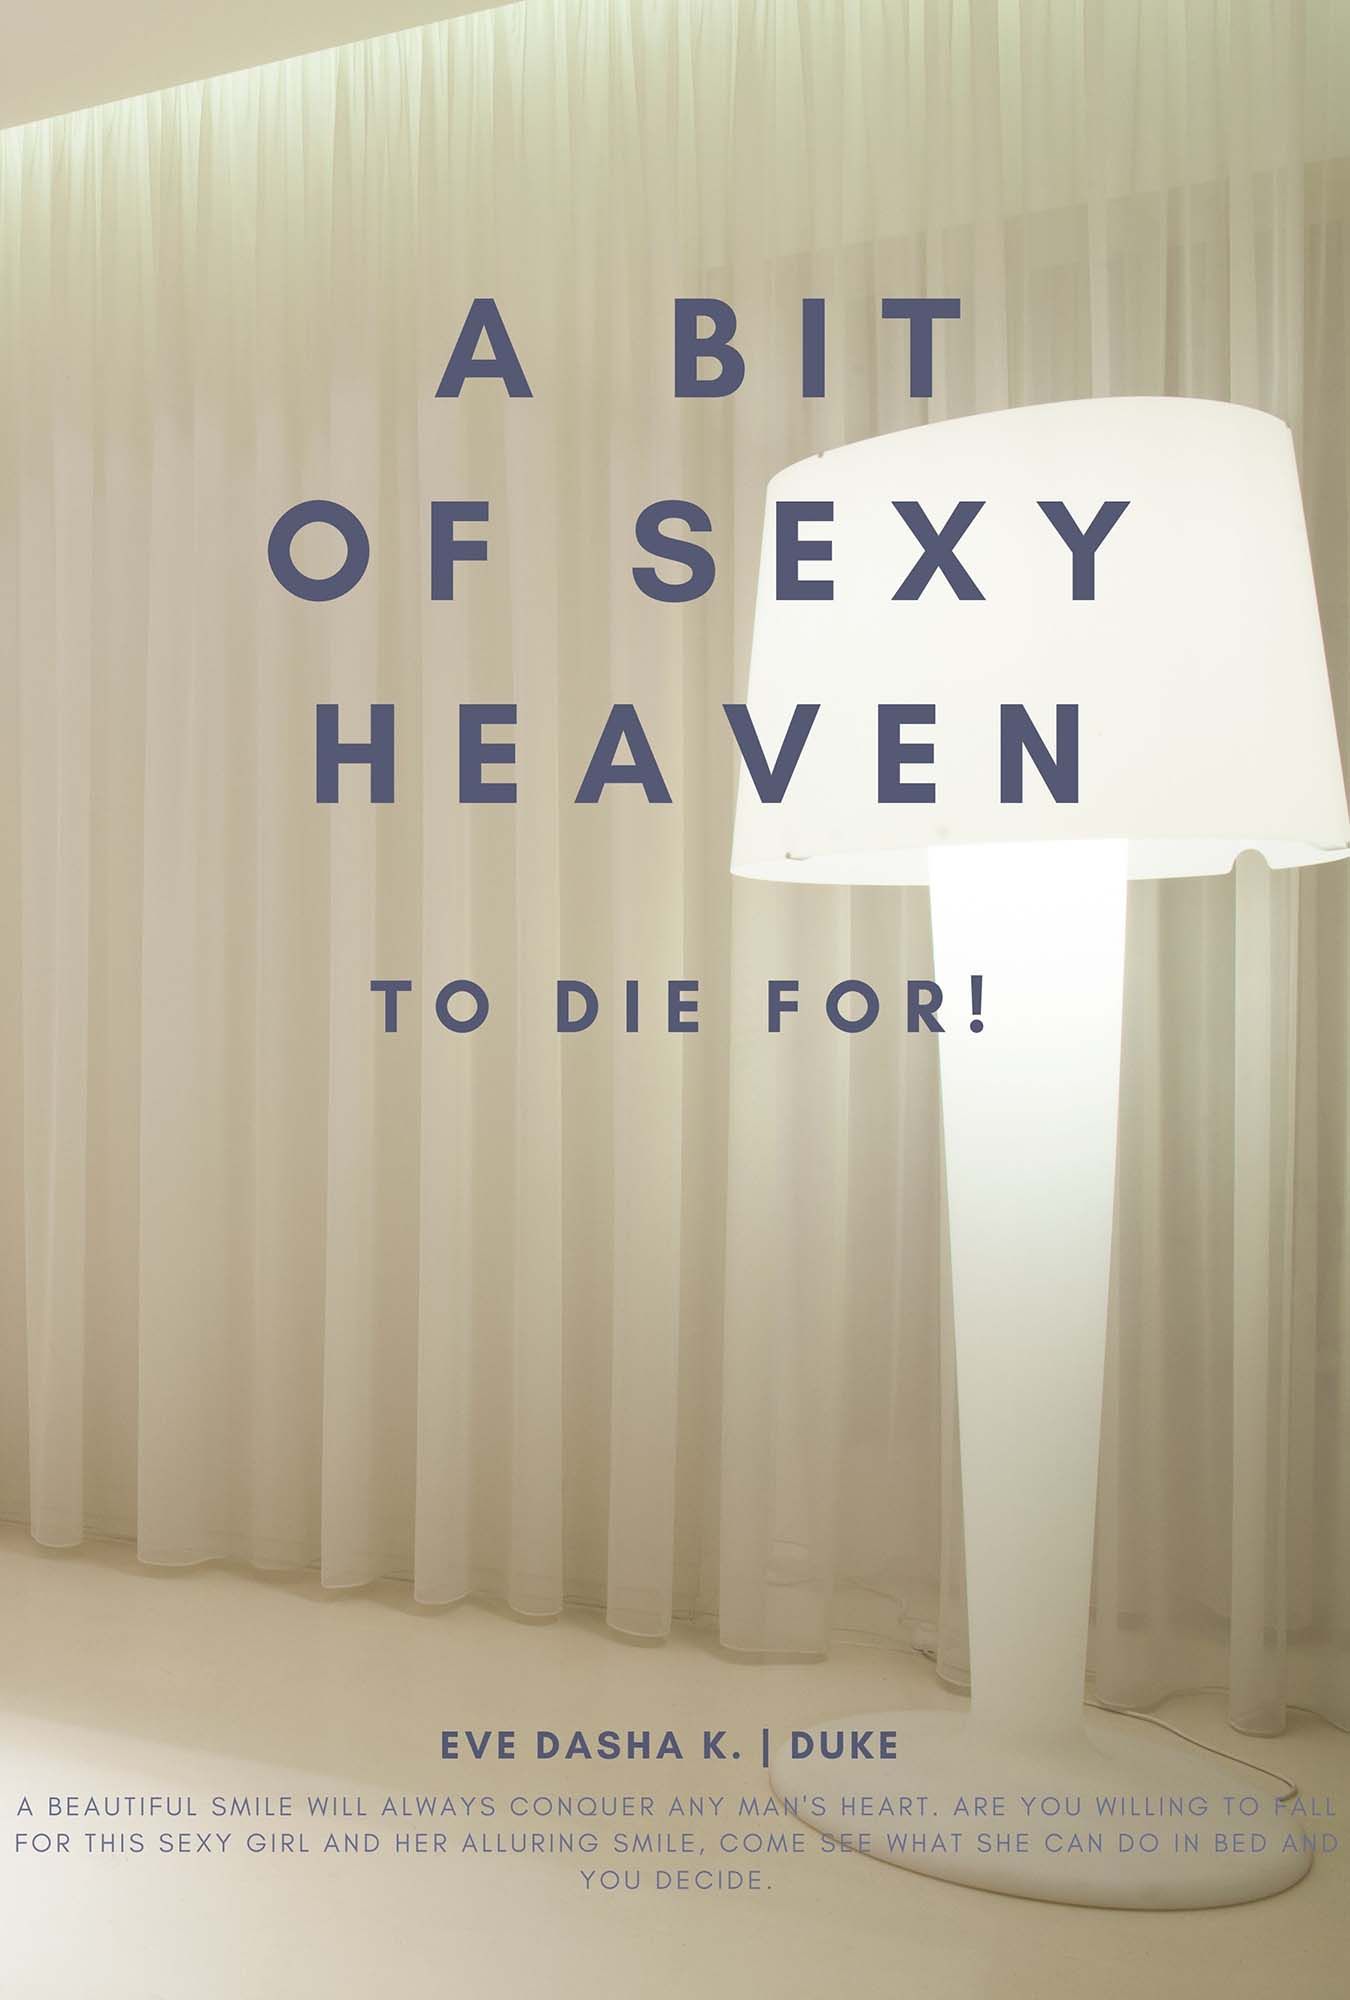 A bit of sexy heaven to die for!